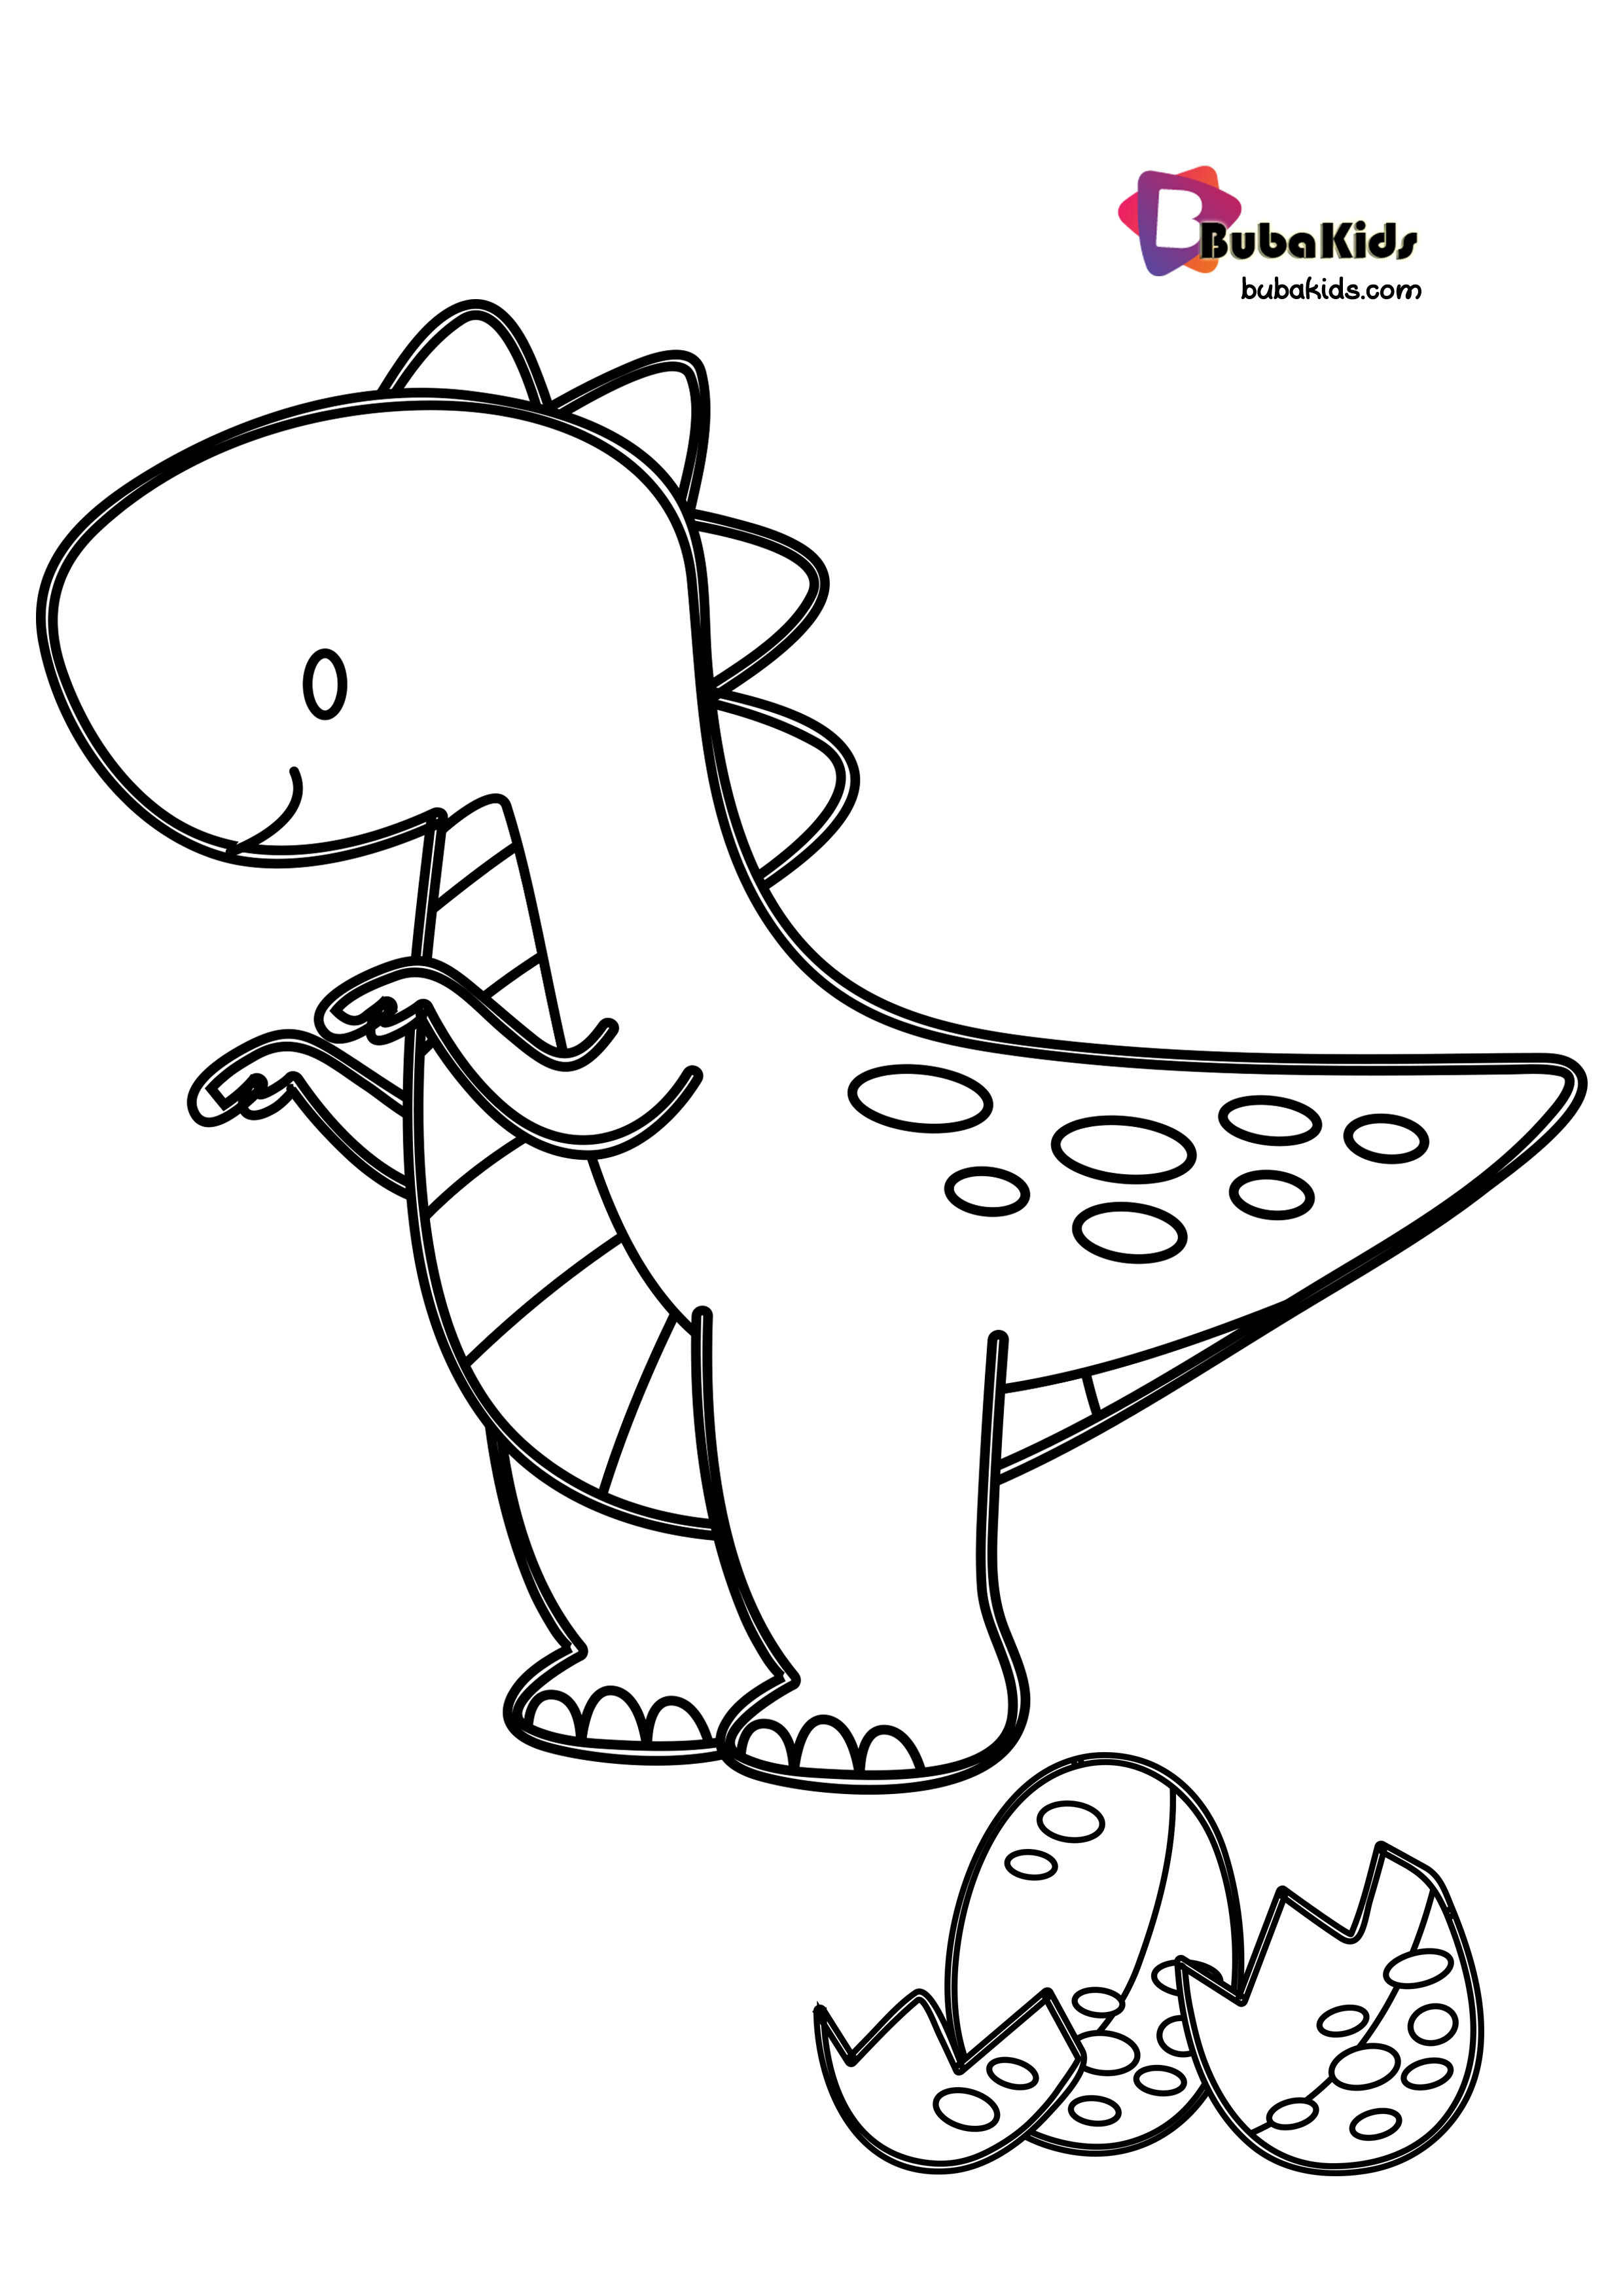 baby-t-rex-coloring-page-with-egg - BubaKids.com